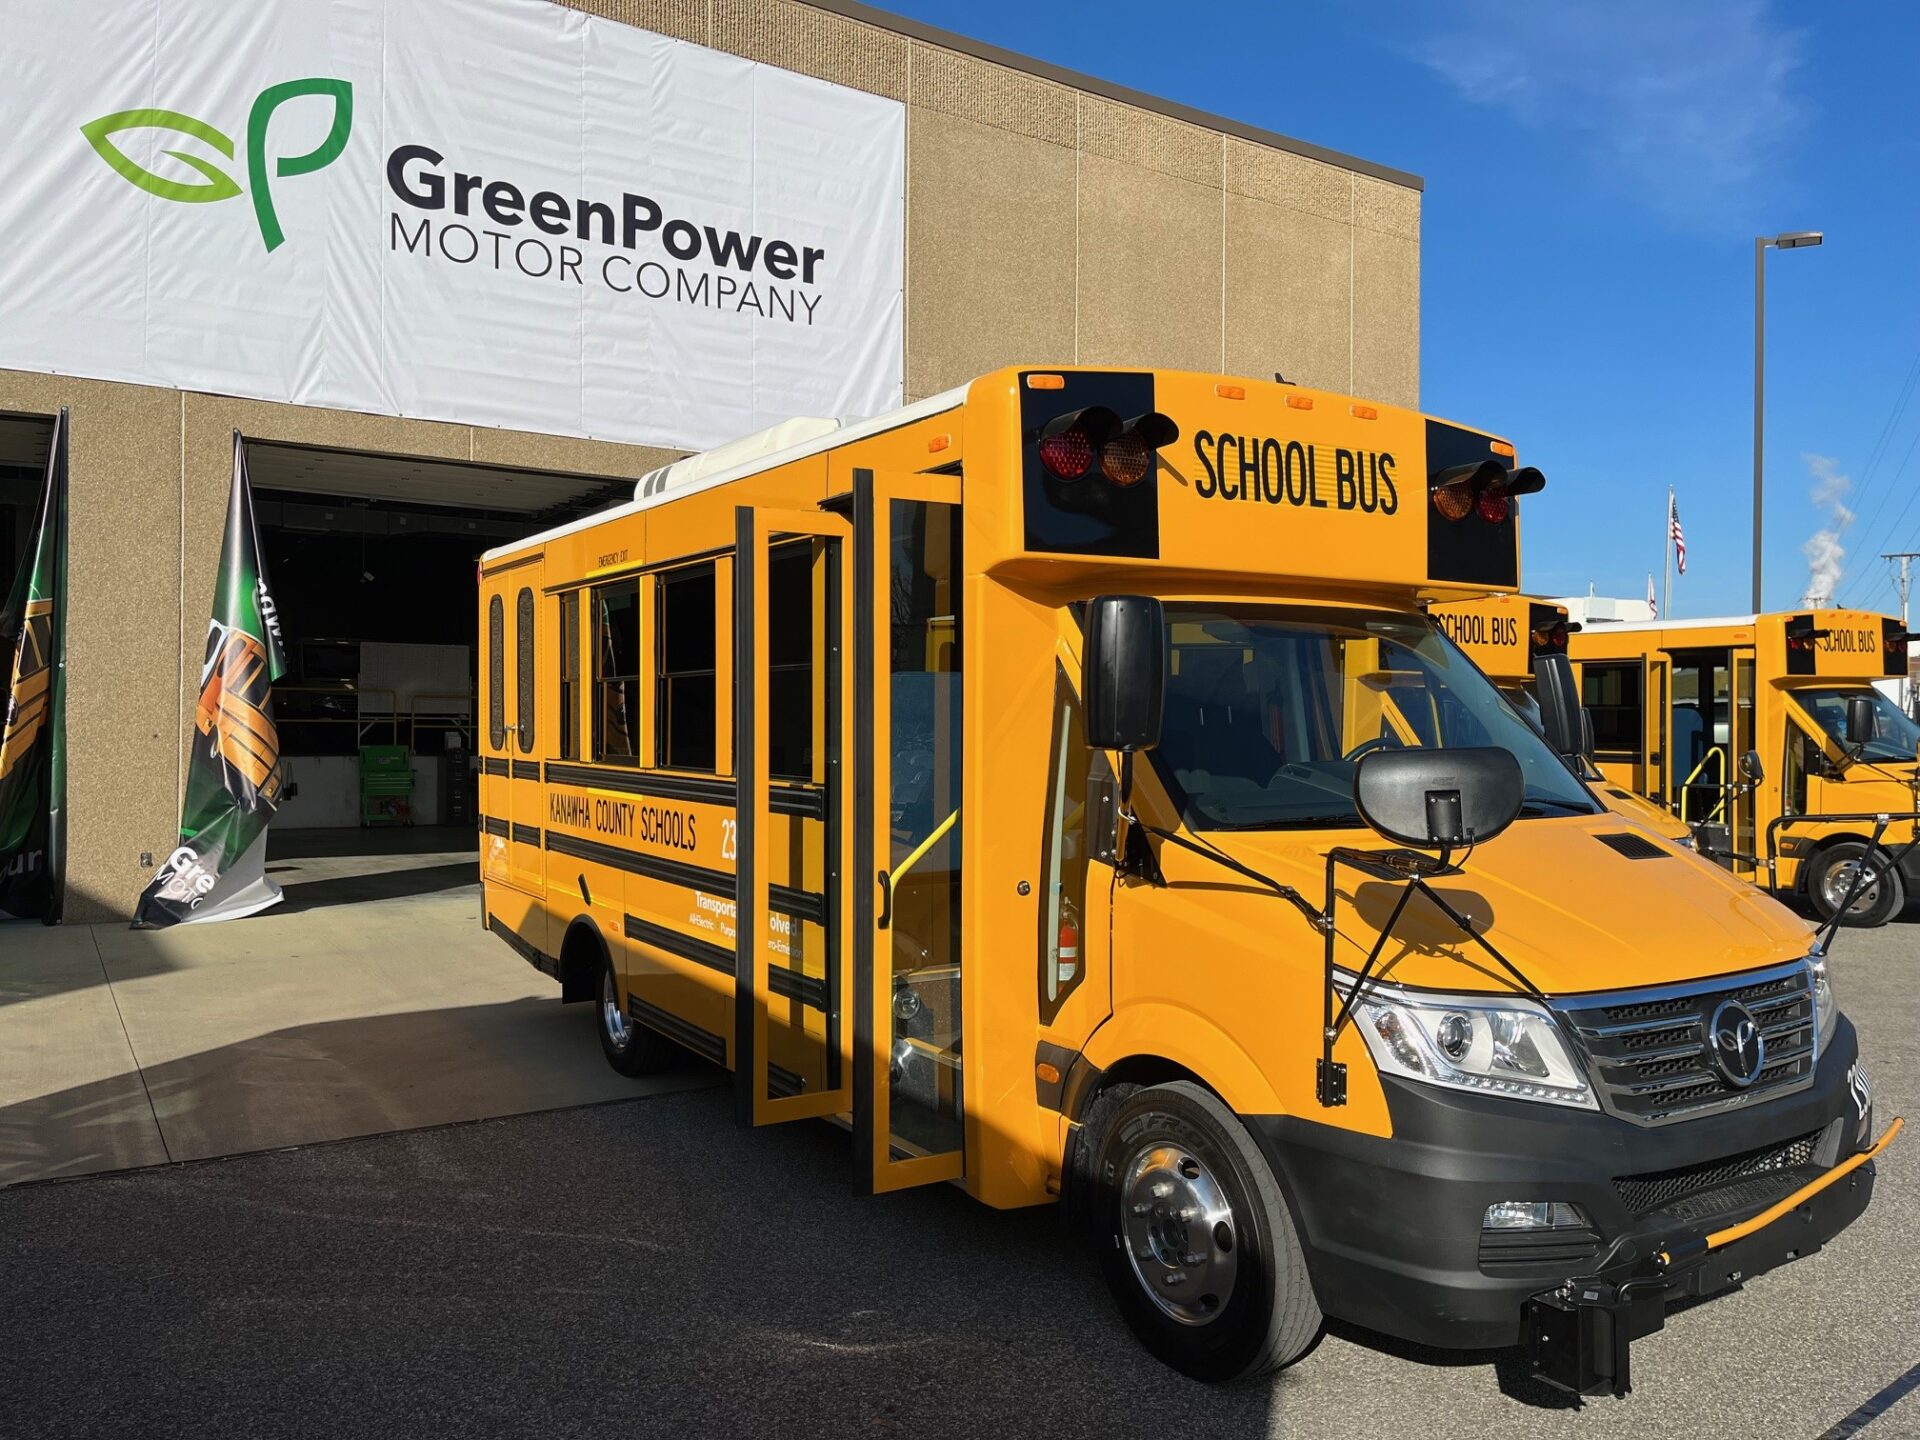 GreenPower Gets Grant To Build 47 Electric School Buses